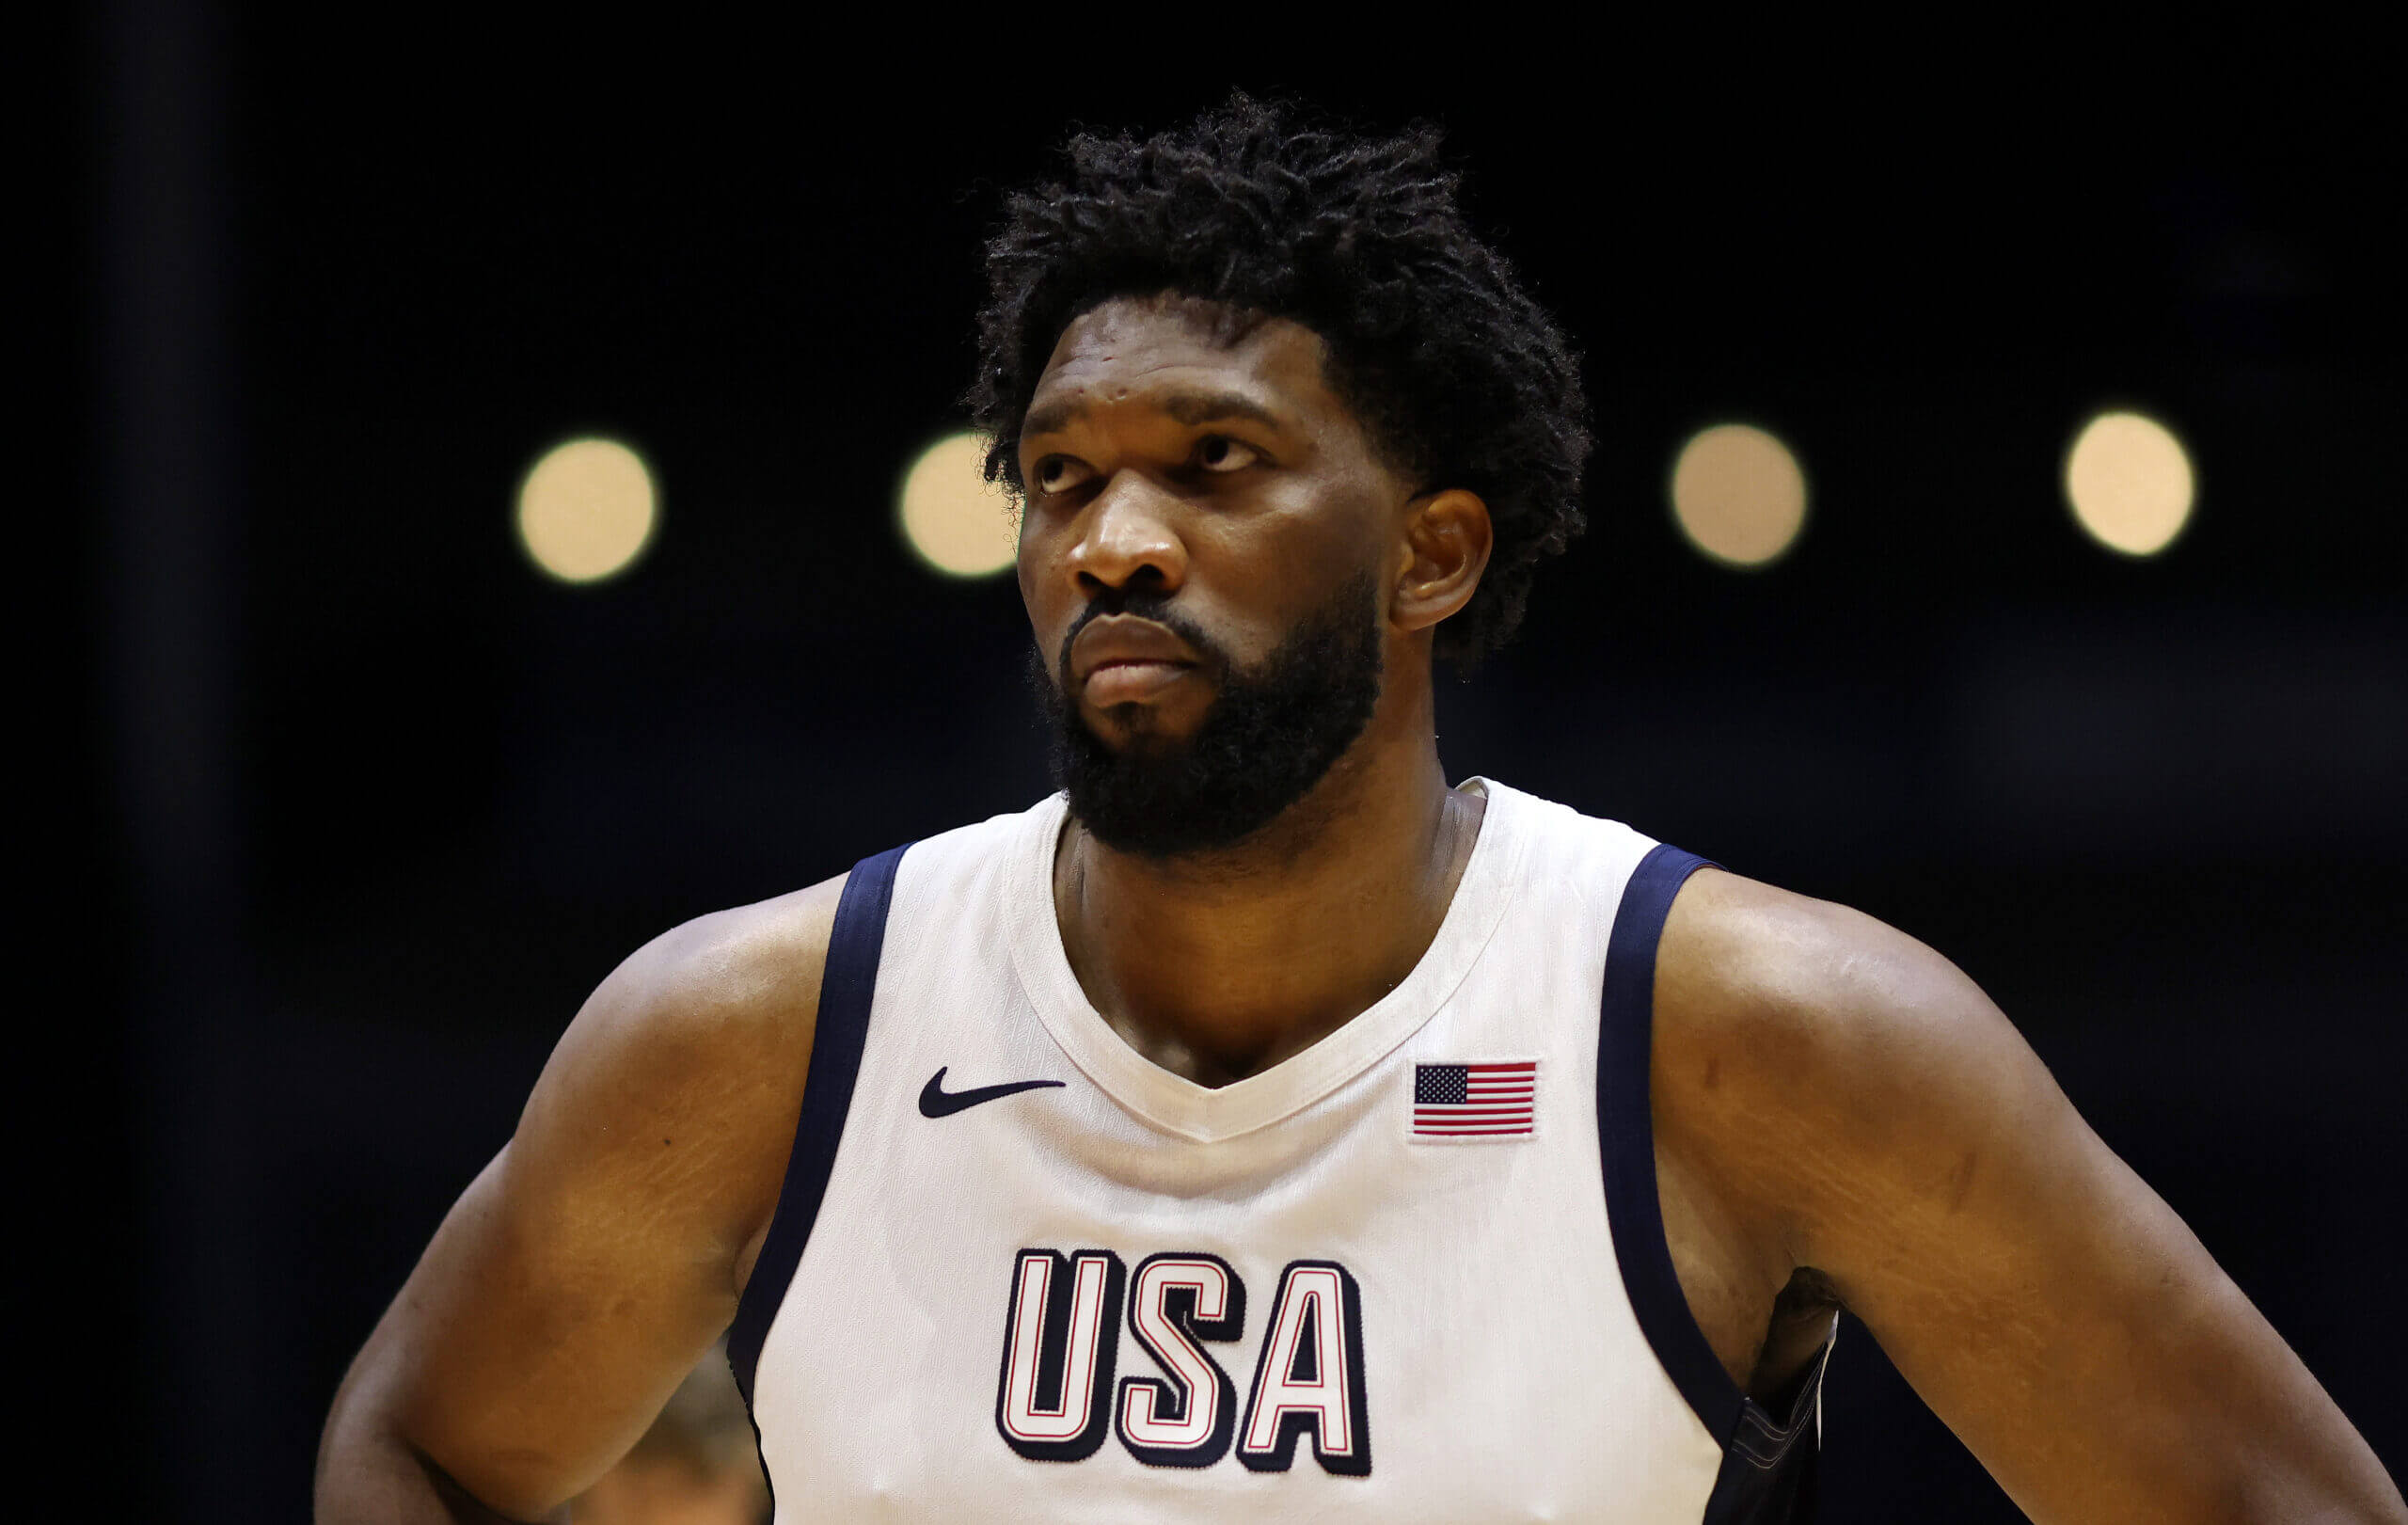 Team USA leaders respond to Joel Embiid comments about team's age: 'We're figuring out ways to be effective'